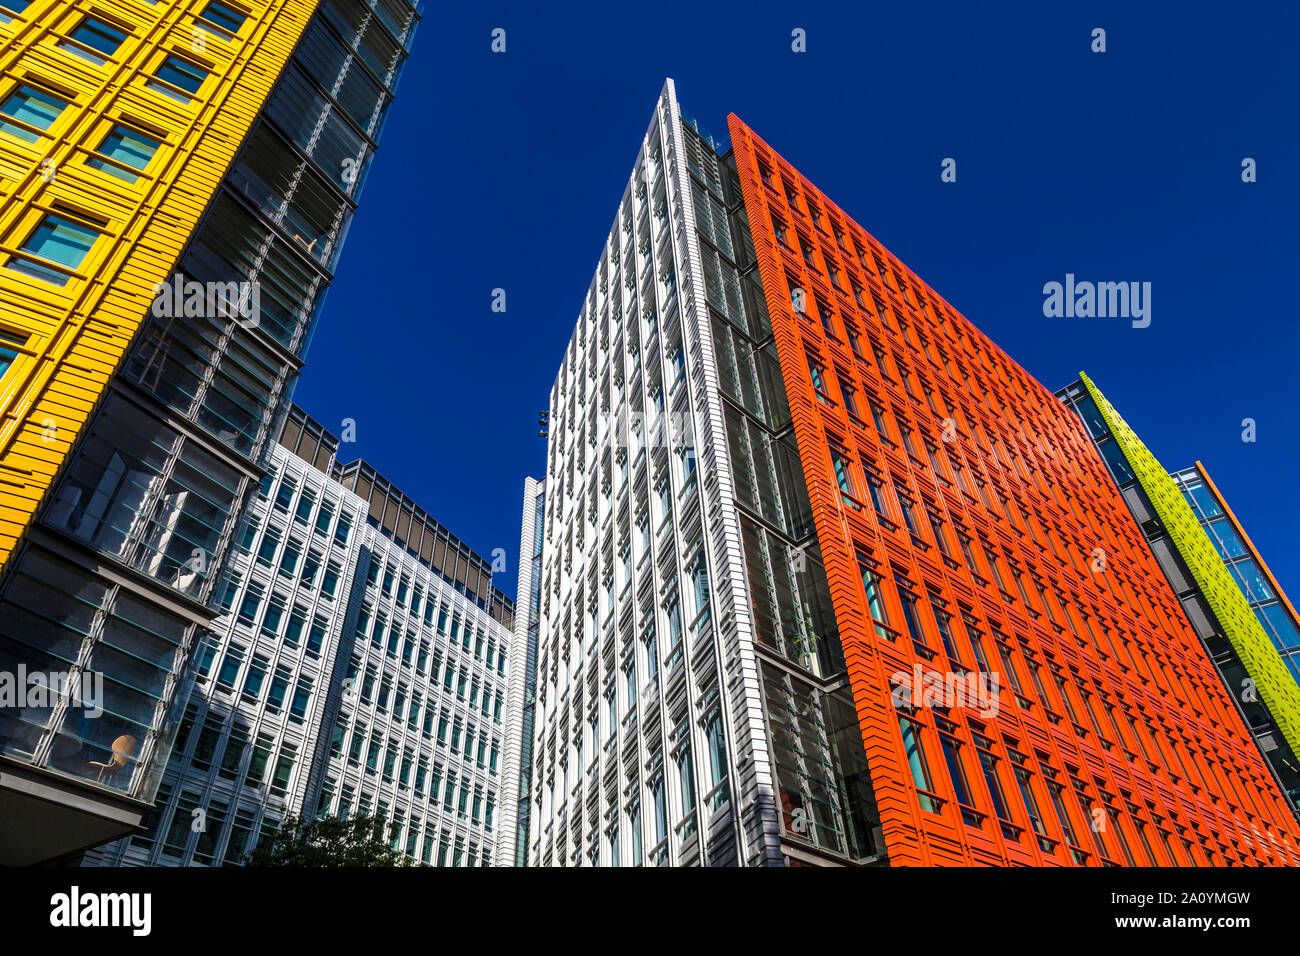 Colourful building facade of Central Saint Giles designed by Italian architect Renzo Piano, St Giles, London, UK Stock Photo